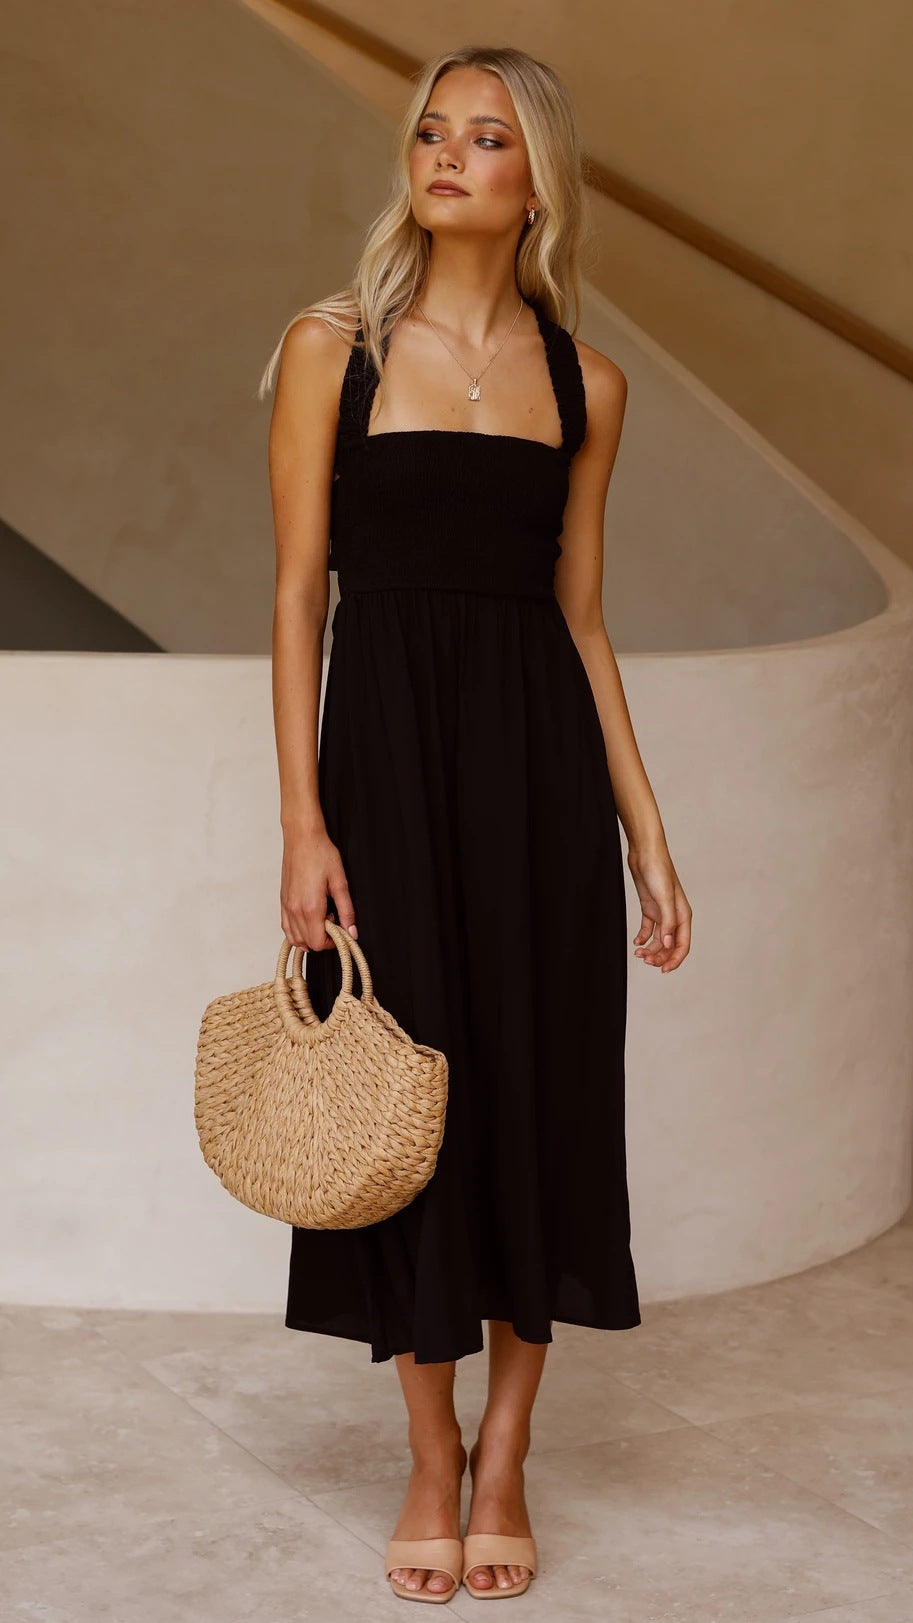 Chic Square Neck Solid Color Maxi Dress with Waist Belt